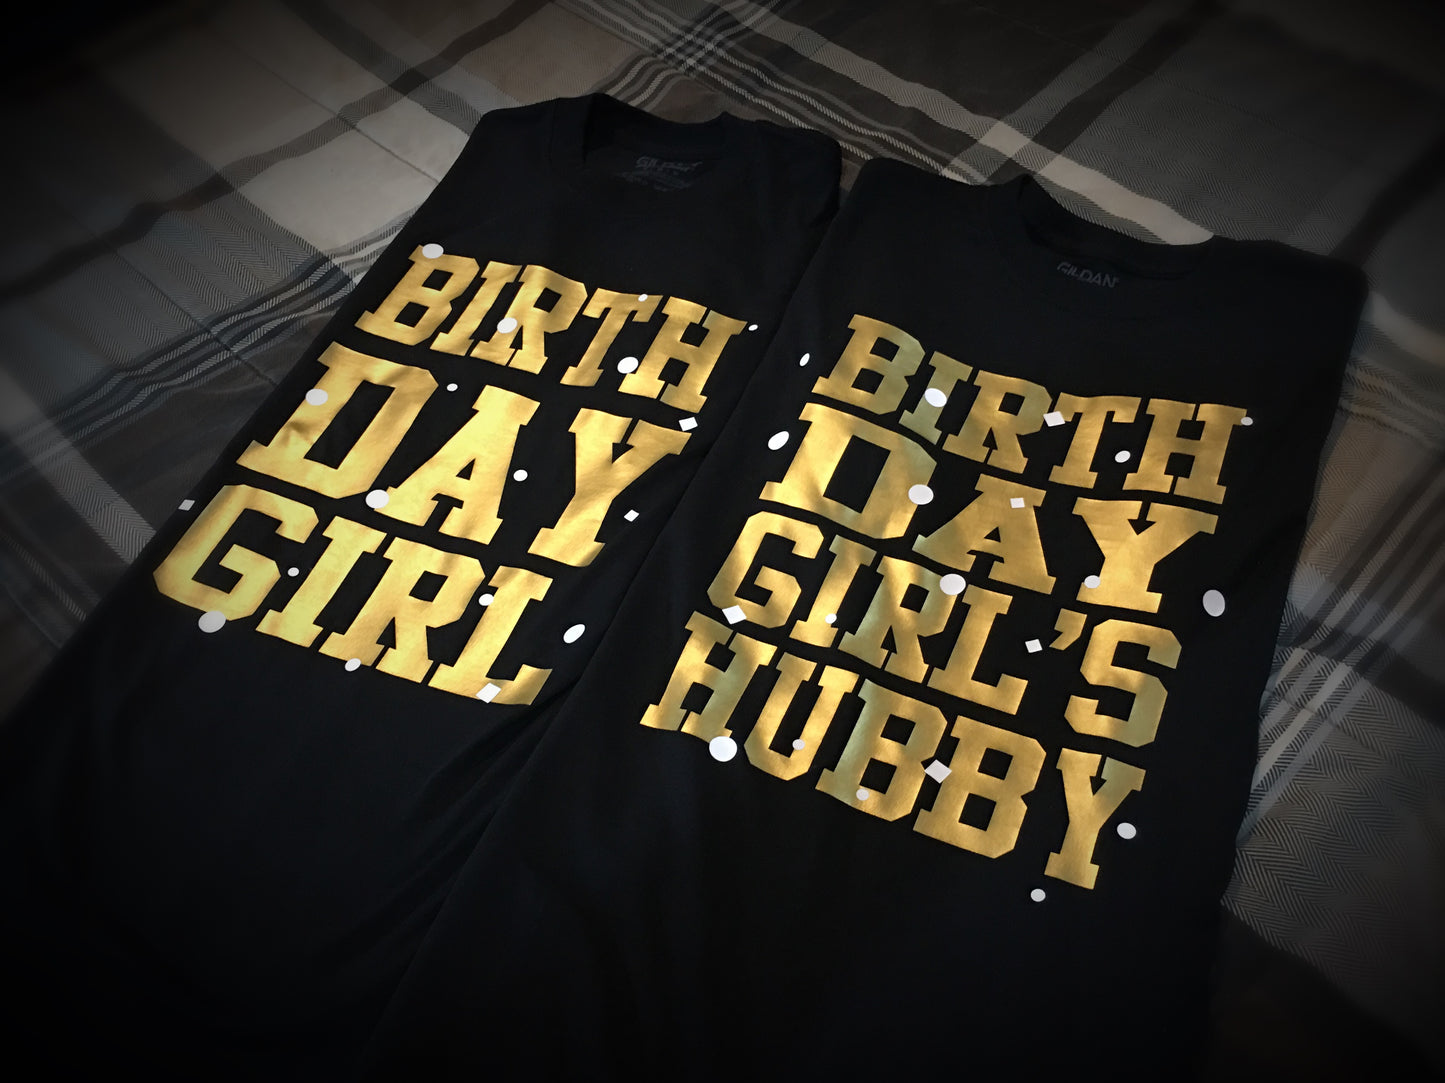 Birthday Girl or Husband (Hubby) of the Birthday Girl T-Shirt (Black, Gold, and White)